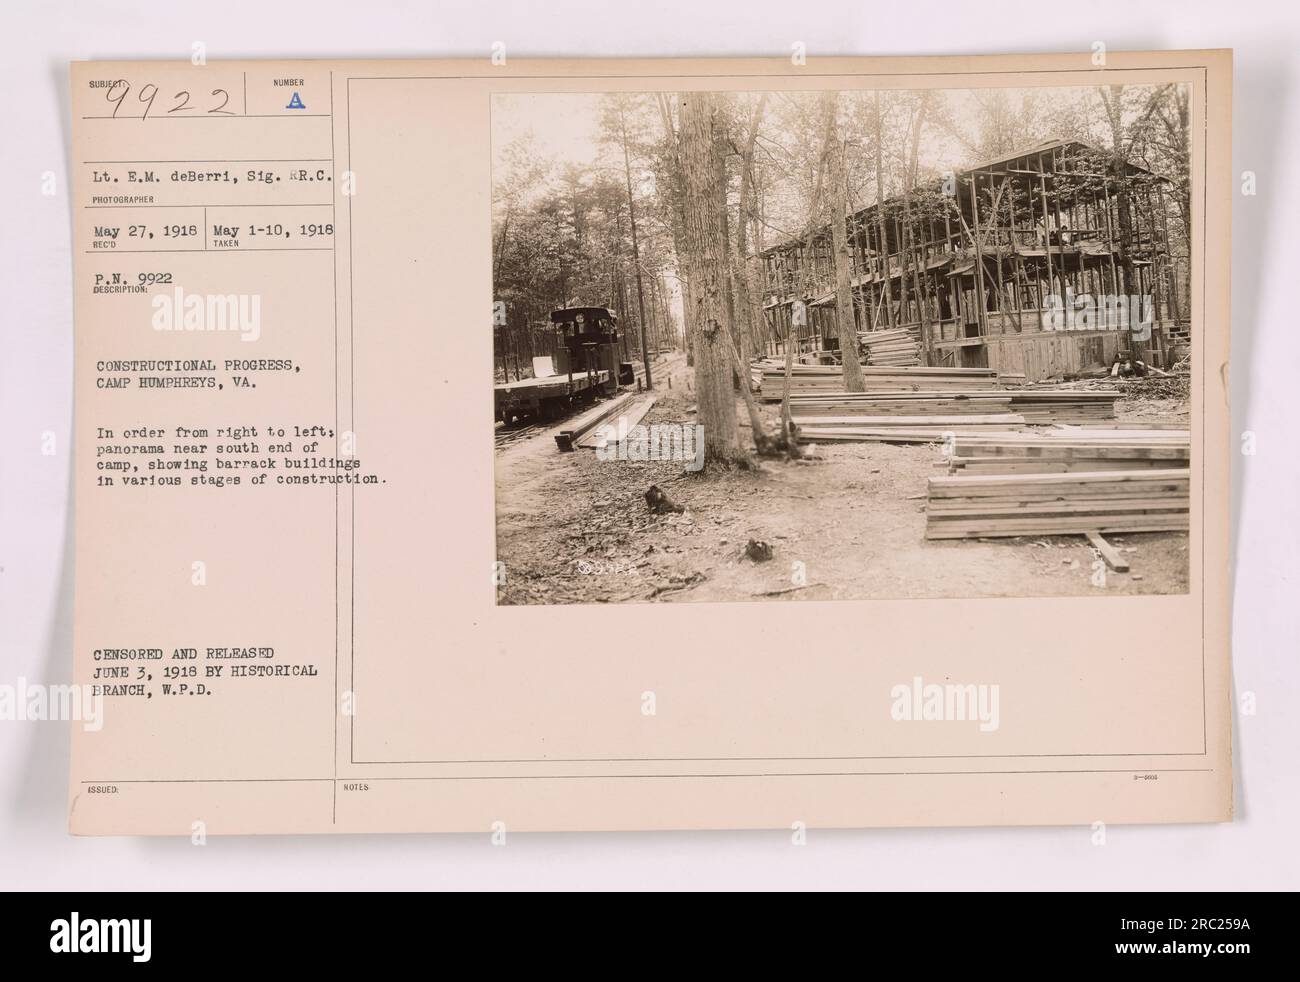 Panoramic view of a construction site at Camp Humphreys, VA. The image, taken on May 27, 1918, shows barracks buildings in various stages of construction, from right to left. The photograph was censored and released on June 3, 1918, by the Historical Branch, W.P.D. Photographer Lt. E.M. deBerri, Sig. R.C. captured the image. Stock Photo